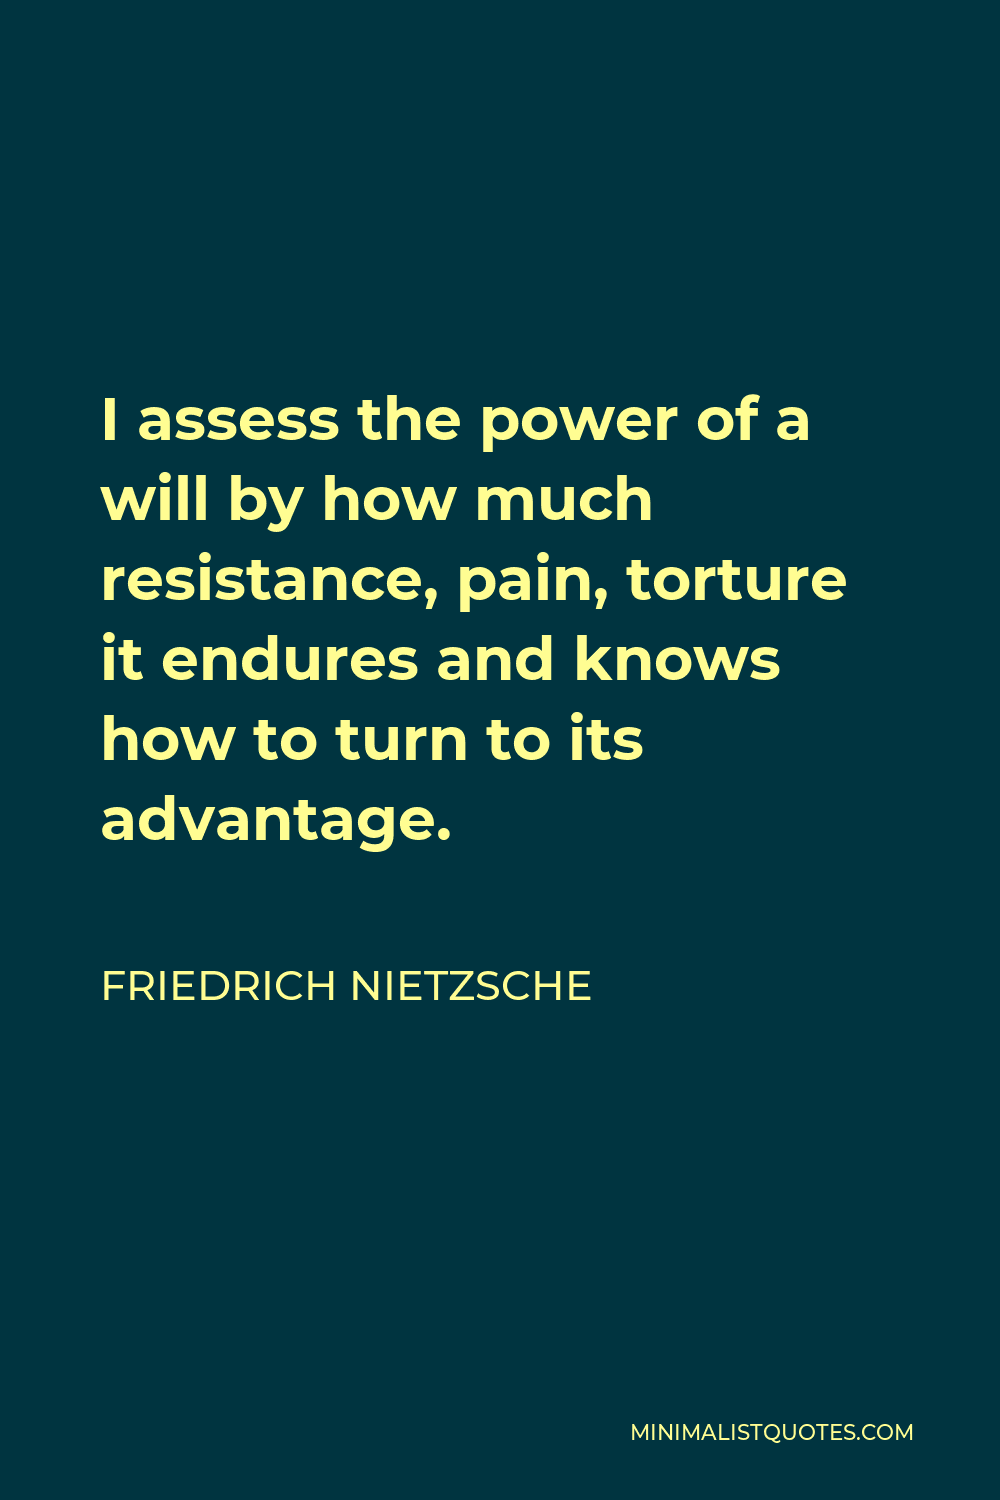 Friedrich Nietzsche Quote - I assess the power of a will by how much resistance, pain, torture it endures and knows how to turn to its advantage.